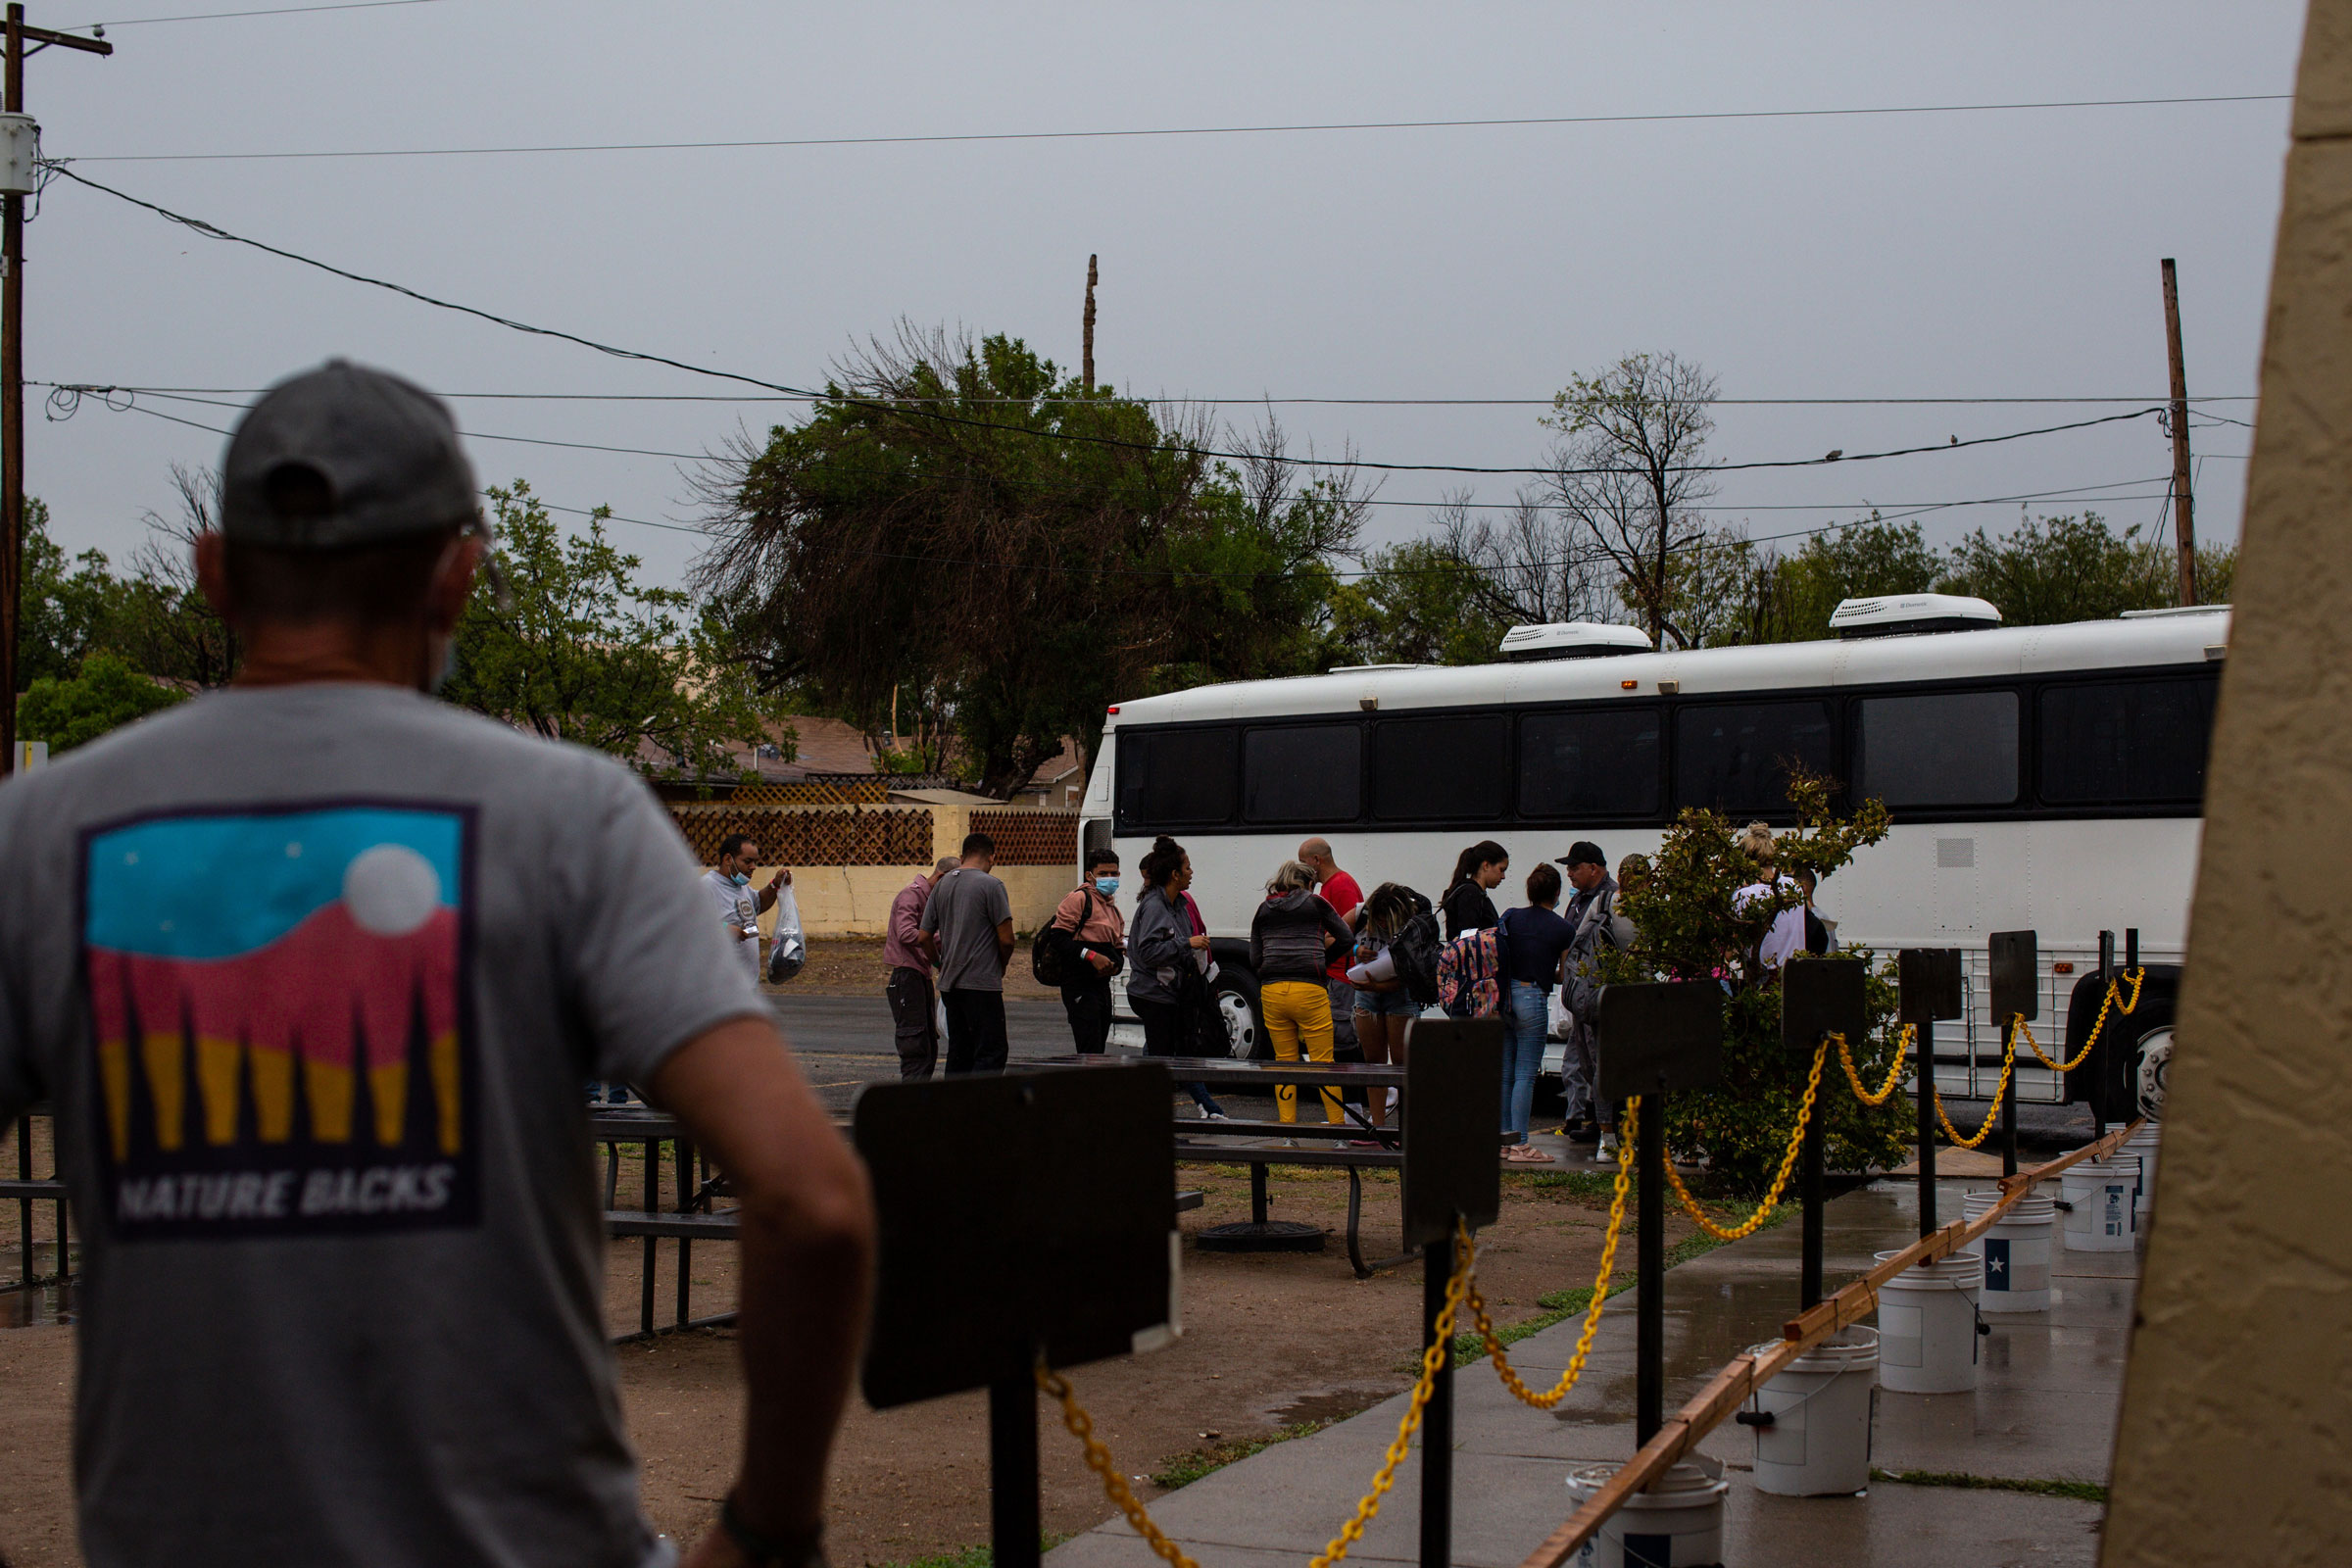 Val Verde Border Humanitarian Coalition volunteer Scott Slater prepares to receive the first bus of migrants arriving for travel assistance in Del Rio, Texas, on Aug. 15, 2022. (Kaylee Greenlee Beal for TIME)